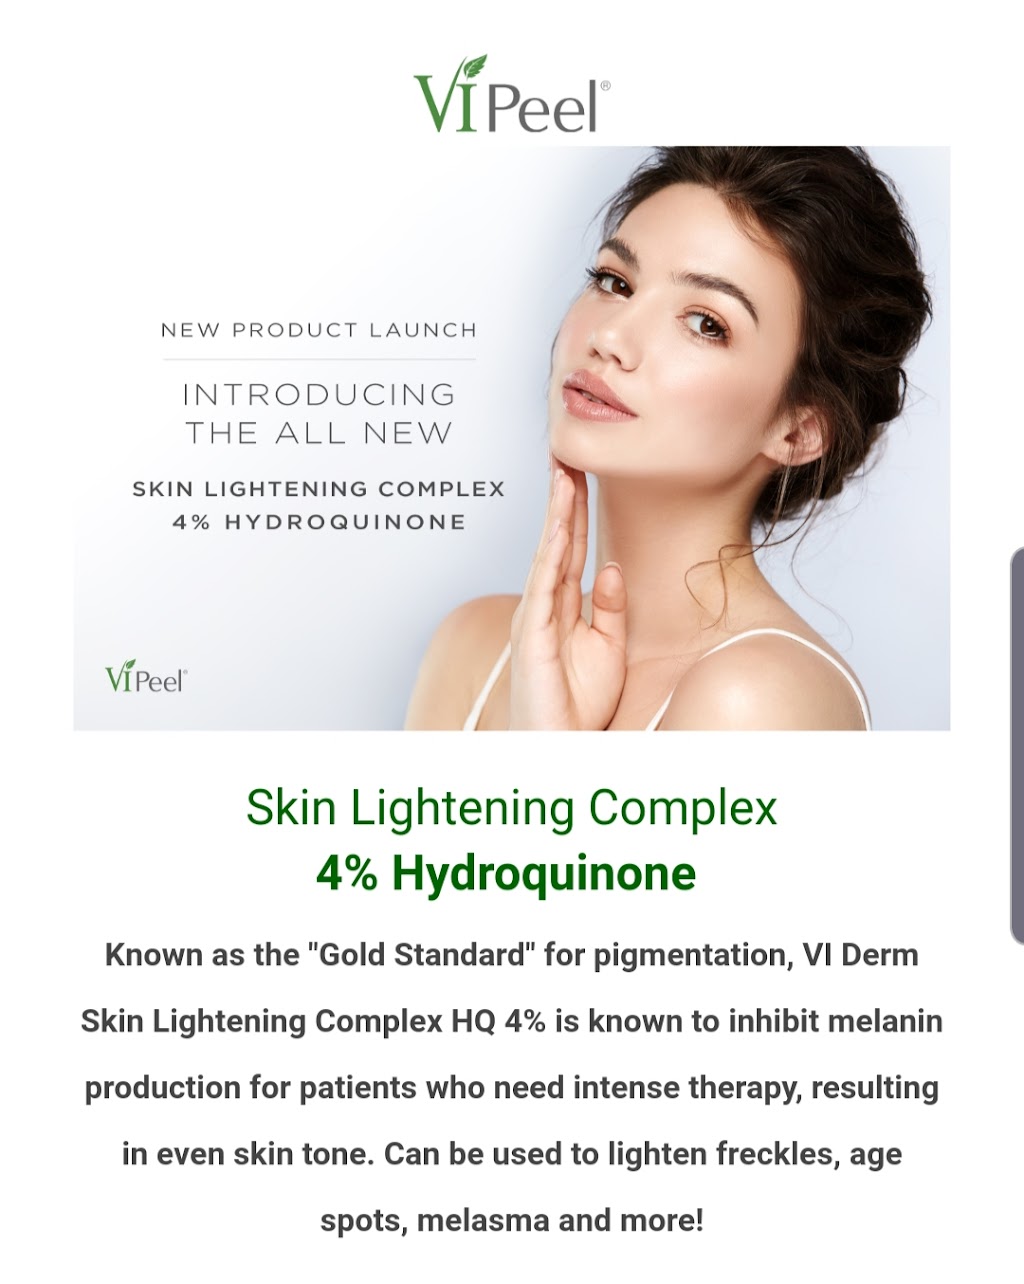 SkinMed | 189-07 Union Tpke, Queens, NY 11366 | Phone: (516) 288-0609